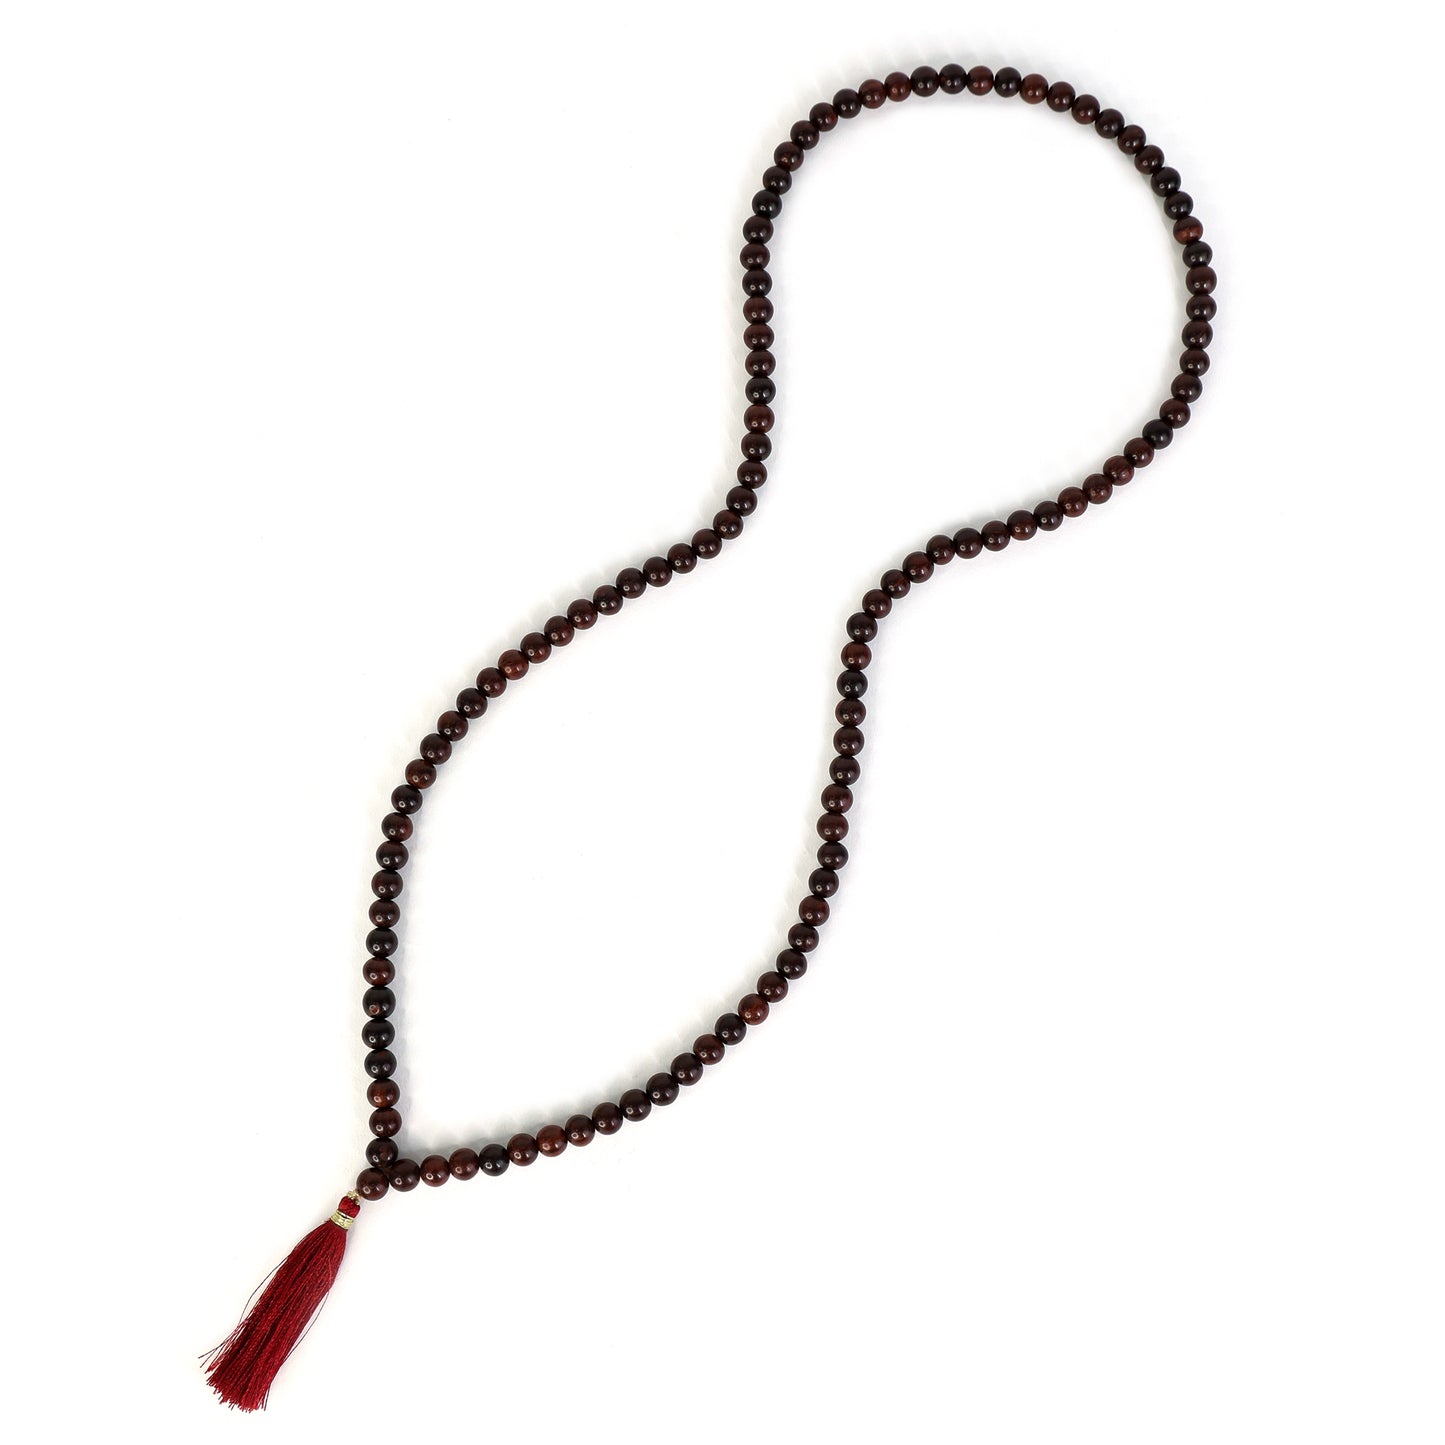 Red Rosewood Beads Mala